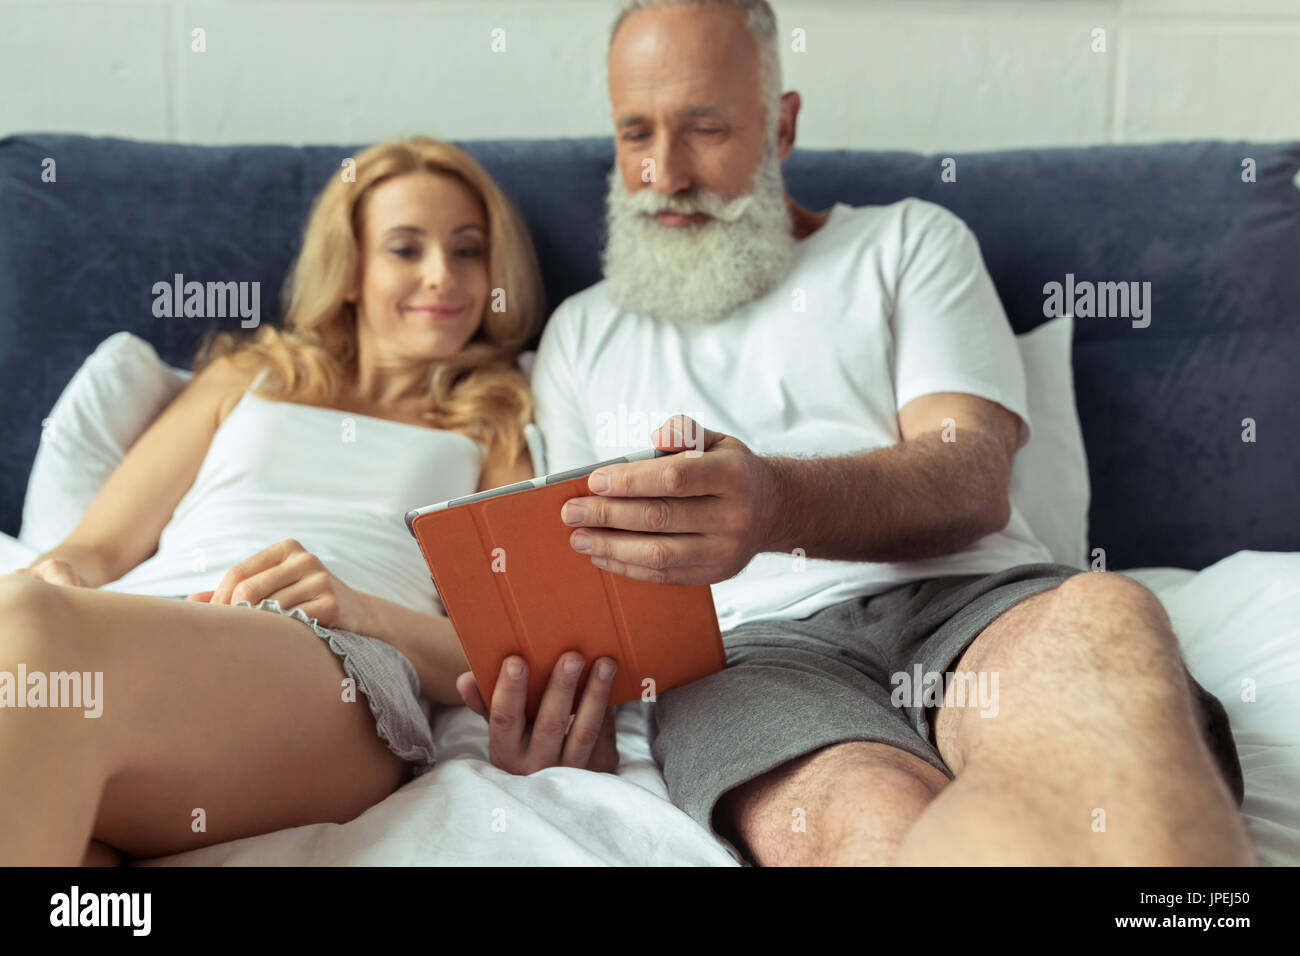 Mature couple using digital tablet while lying on bed at home Banque D'Images